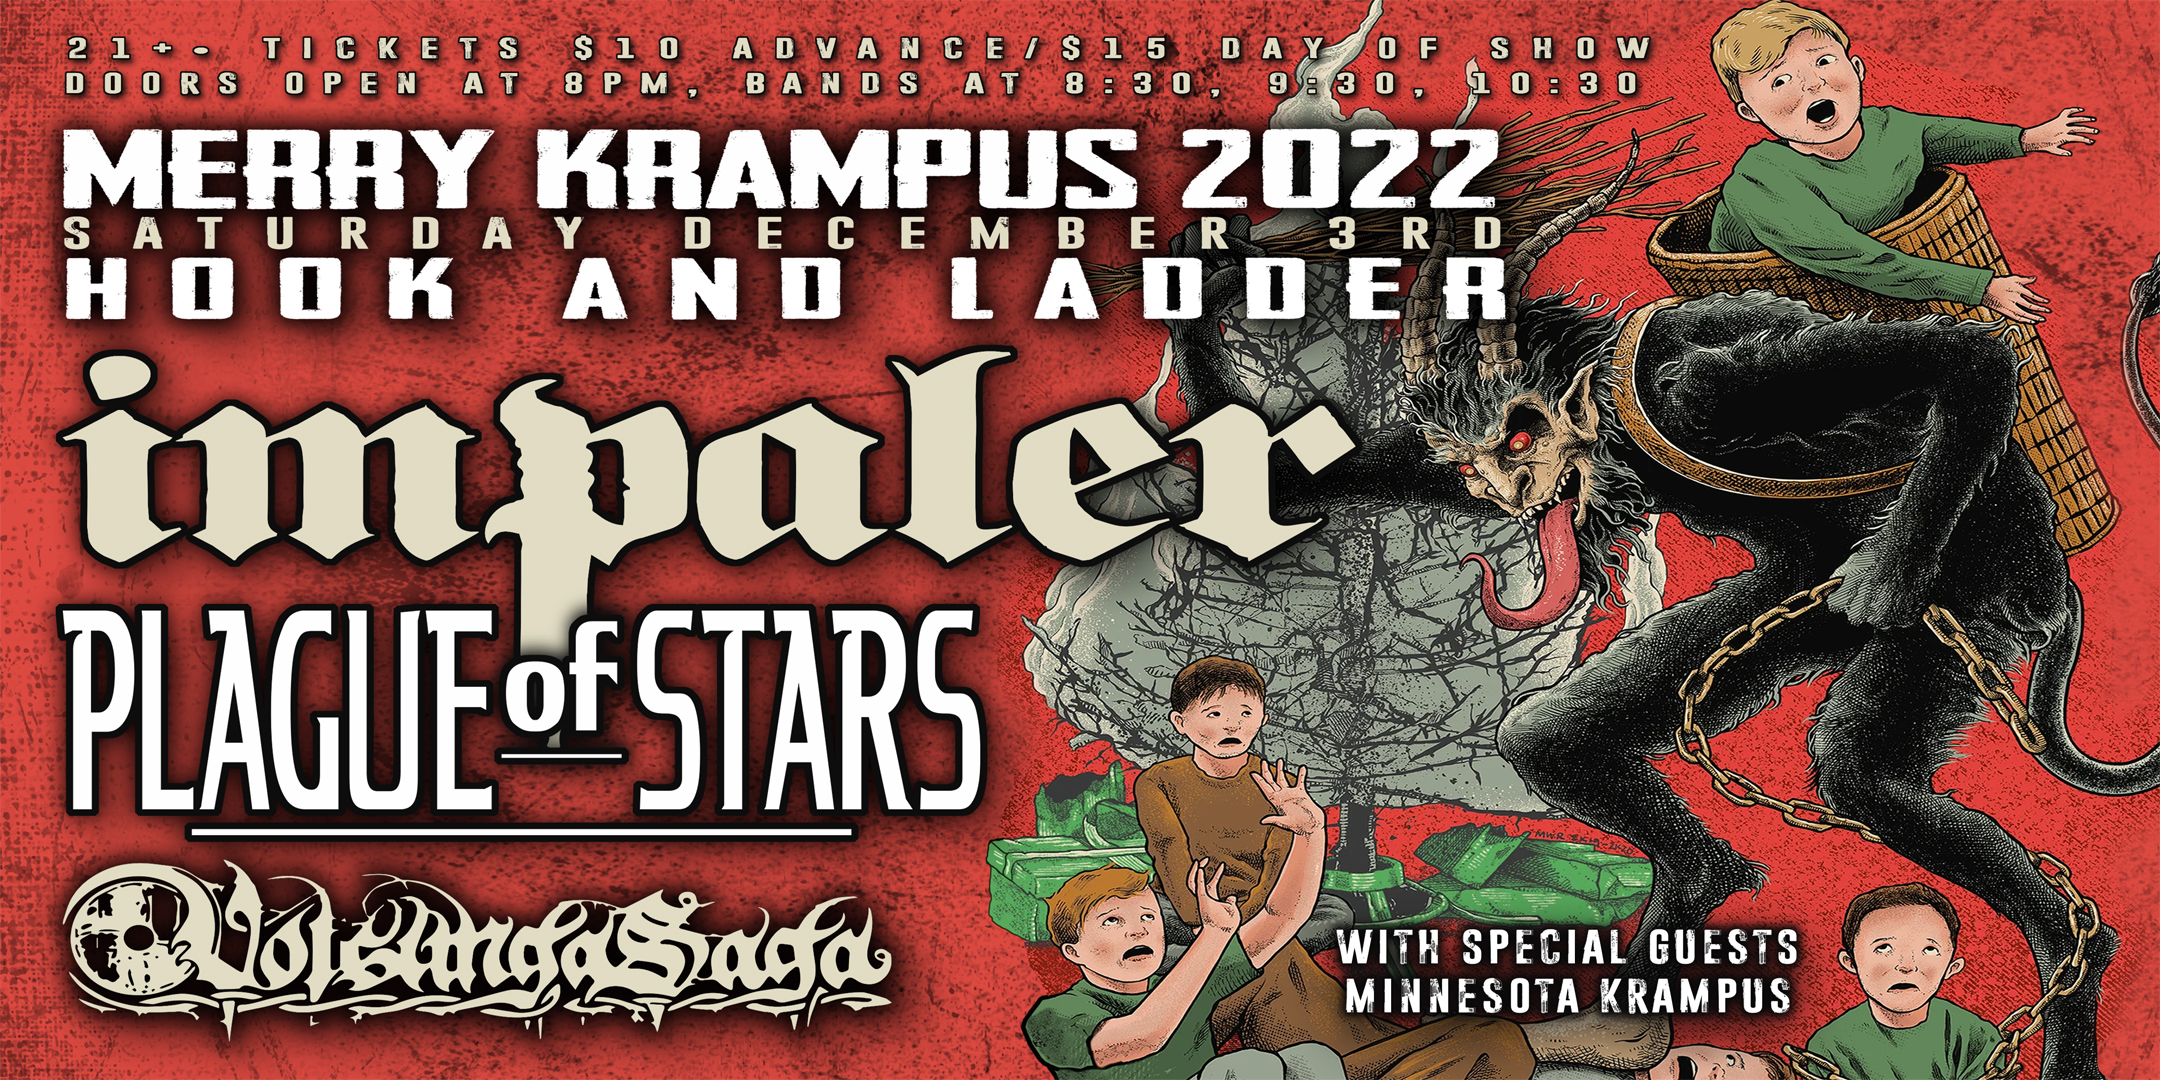 Impaler presents Merry Krampus 2022 Impaler Plague of Stars VolsungaSaga with special guests Minneasota Krampus Saturday December 3 The Hook and Ladder Theater Doors 8:00pm :: Music 8:30pm :: 21+ General Admission $10 ADV / $15 DOS NO REFUNDS